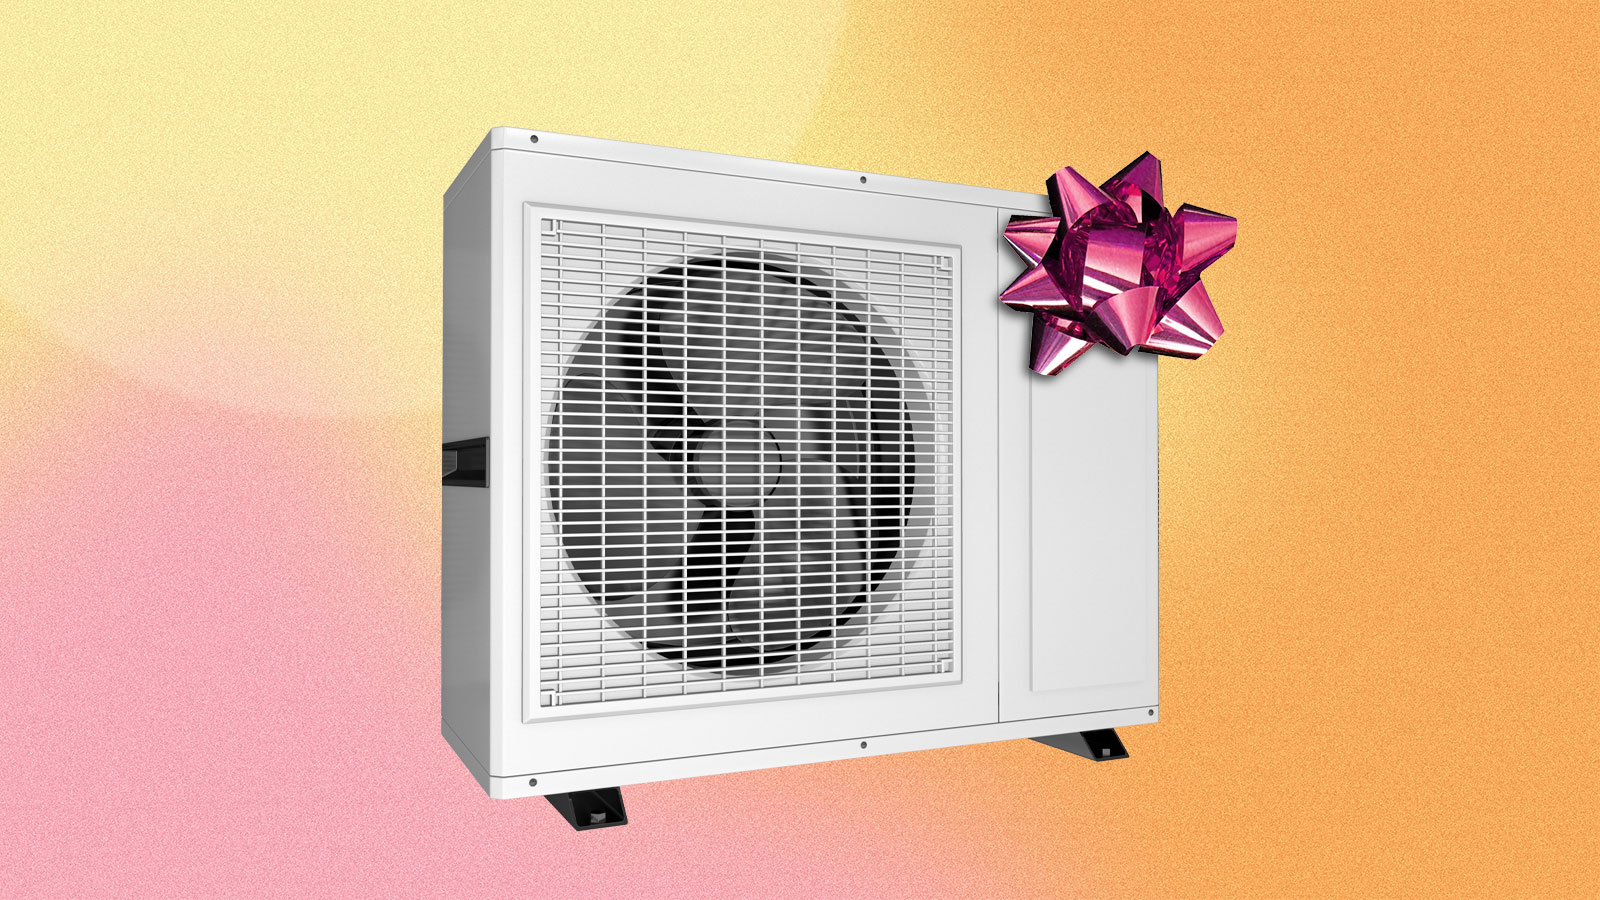 Heat pump with gift bow on the front on top of a colorful background